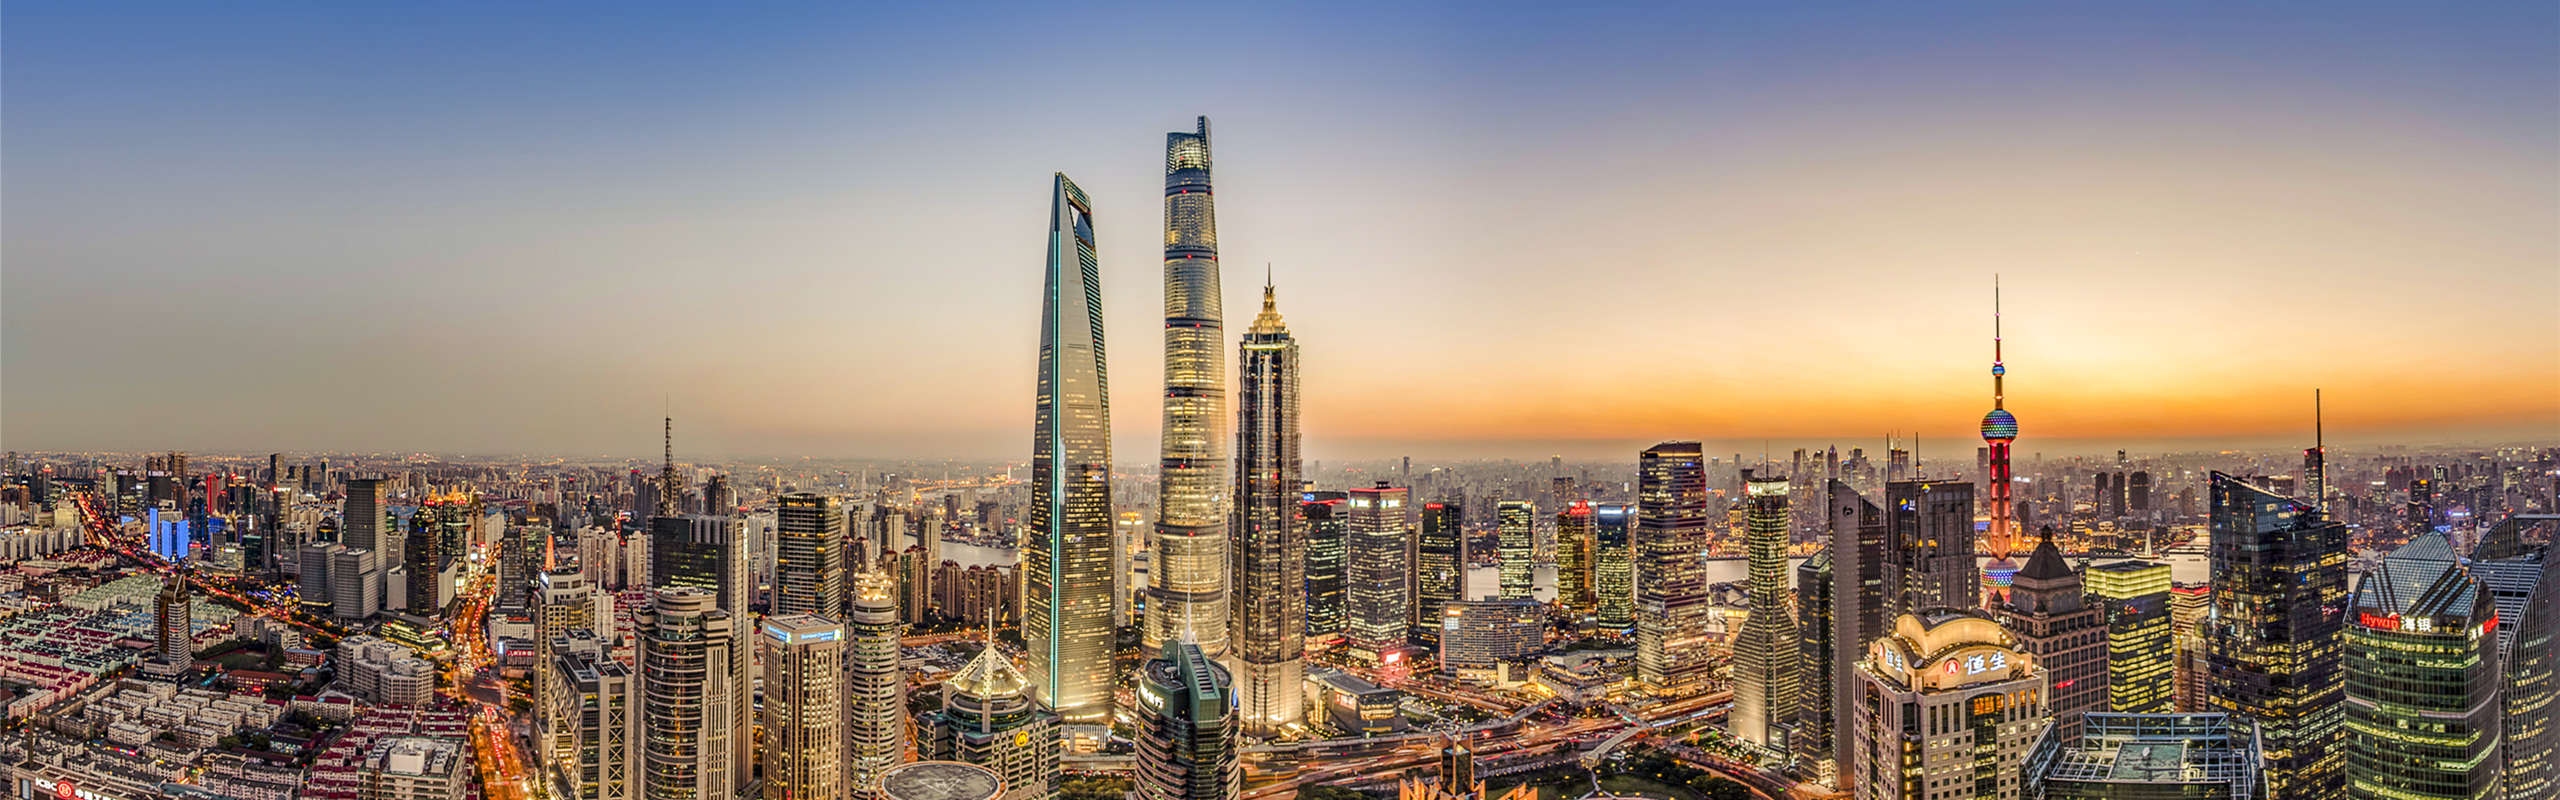 Shanghai Small Group Day Tours